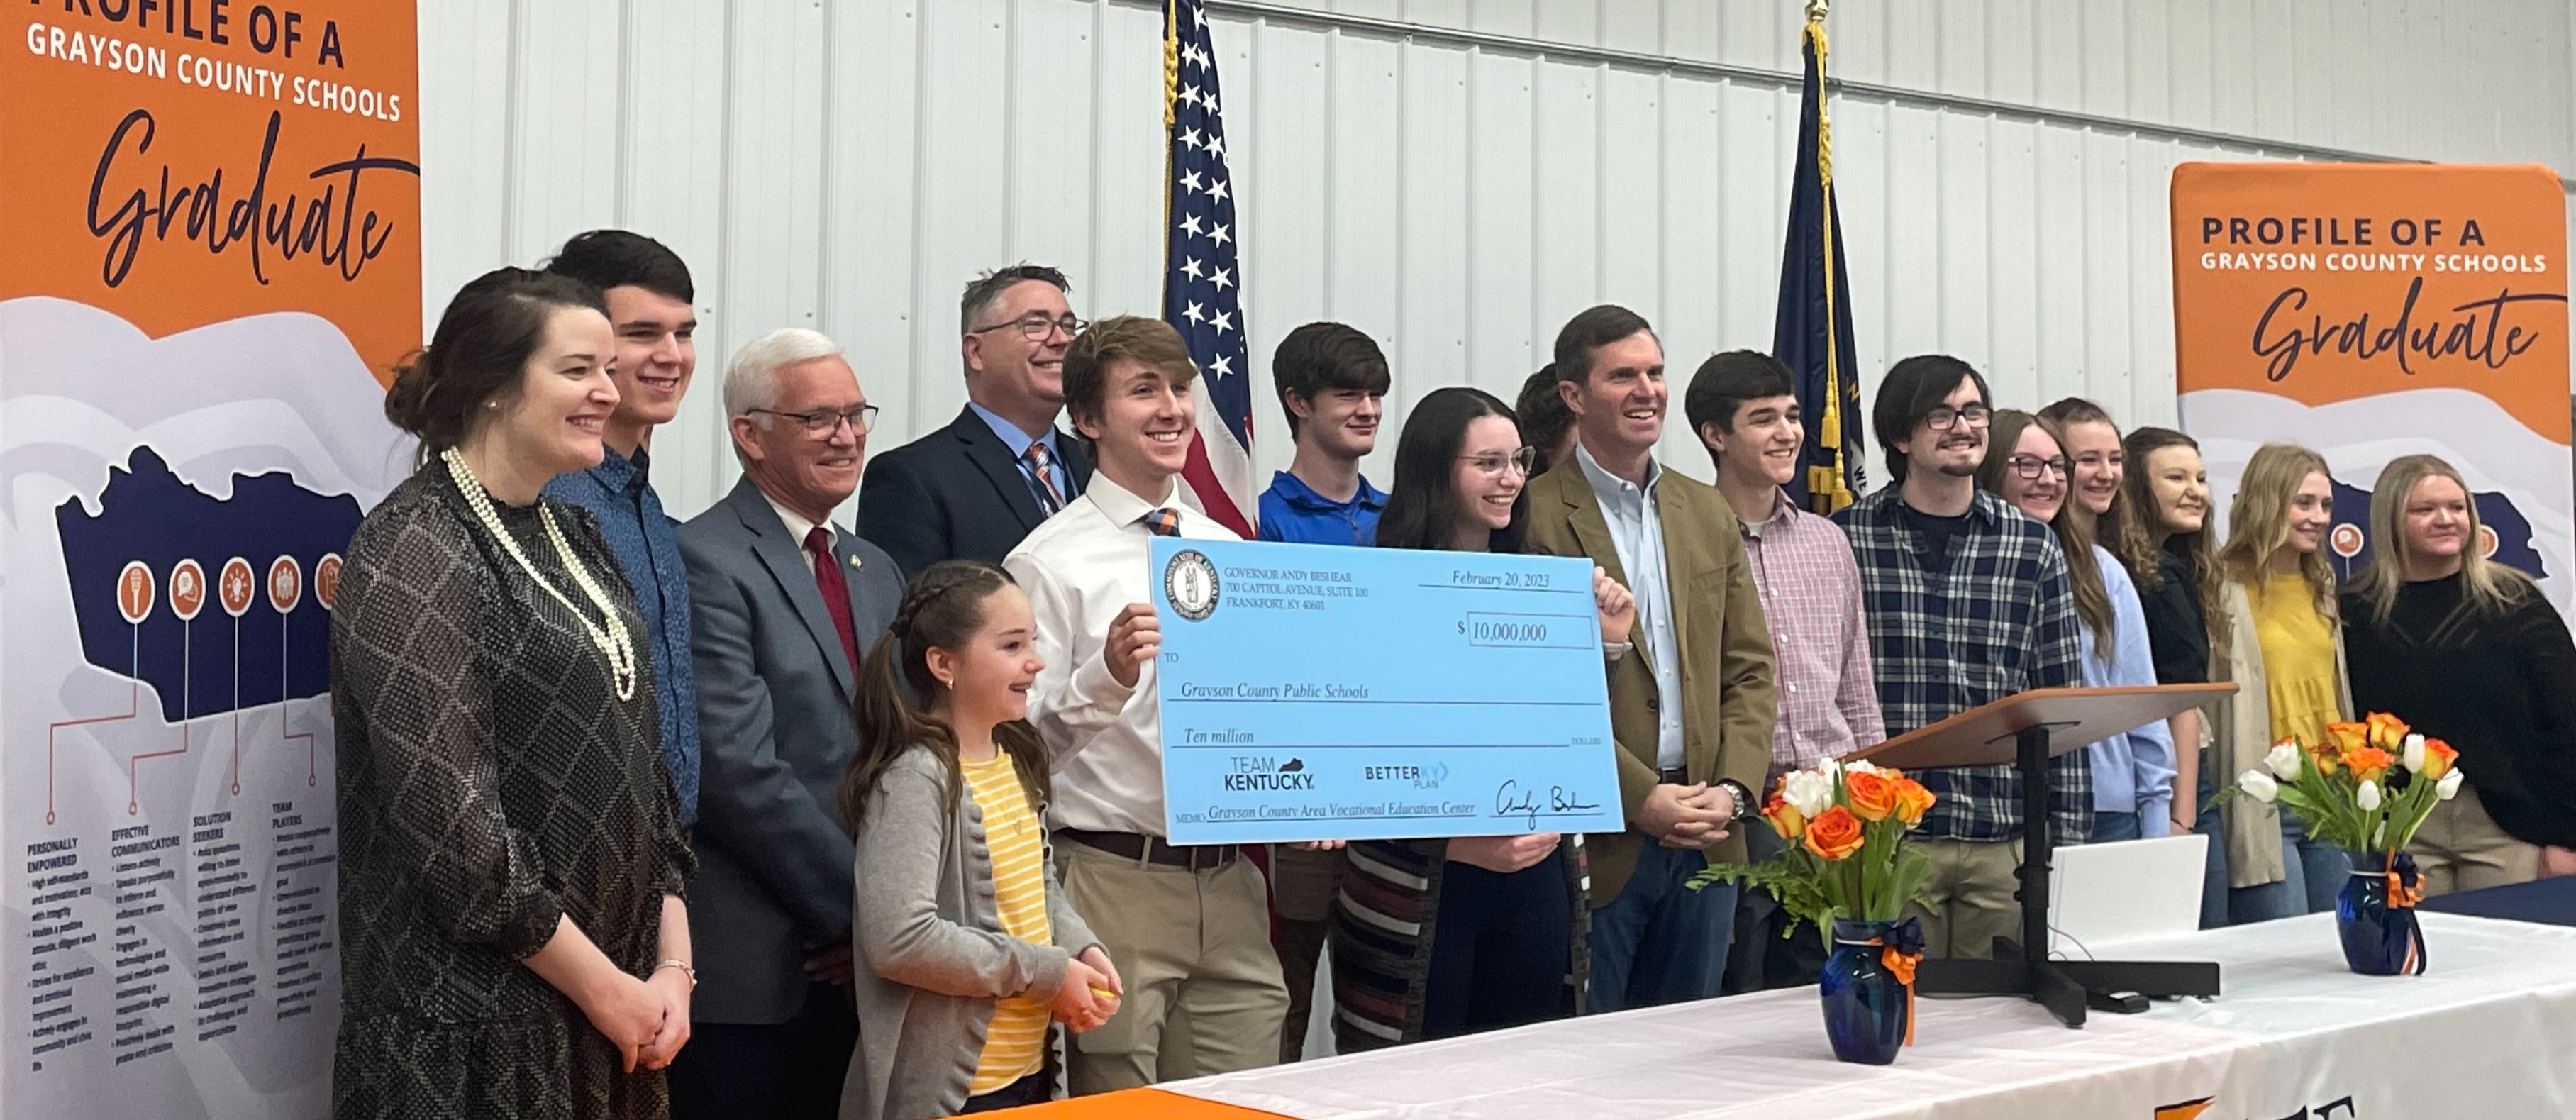 GCS students, Supt Doug Robinson with Gov. Beshear , Steve Meredith and Samara Heavrin holding a large ceremonial check standing in front of an orange, white and navy draped table with CTE logo. American and KY flags behind and flanked by Profile of a GCS graduate vertical banners.